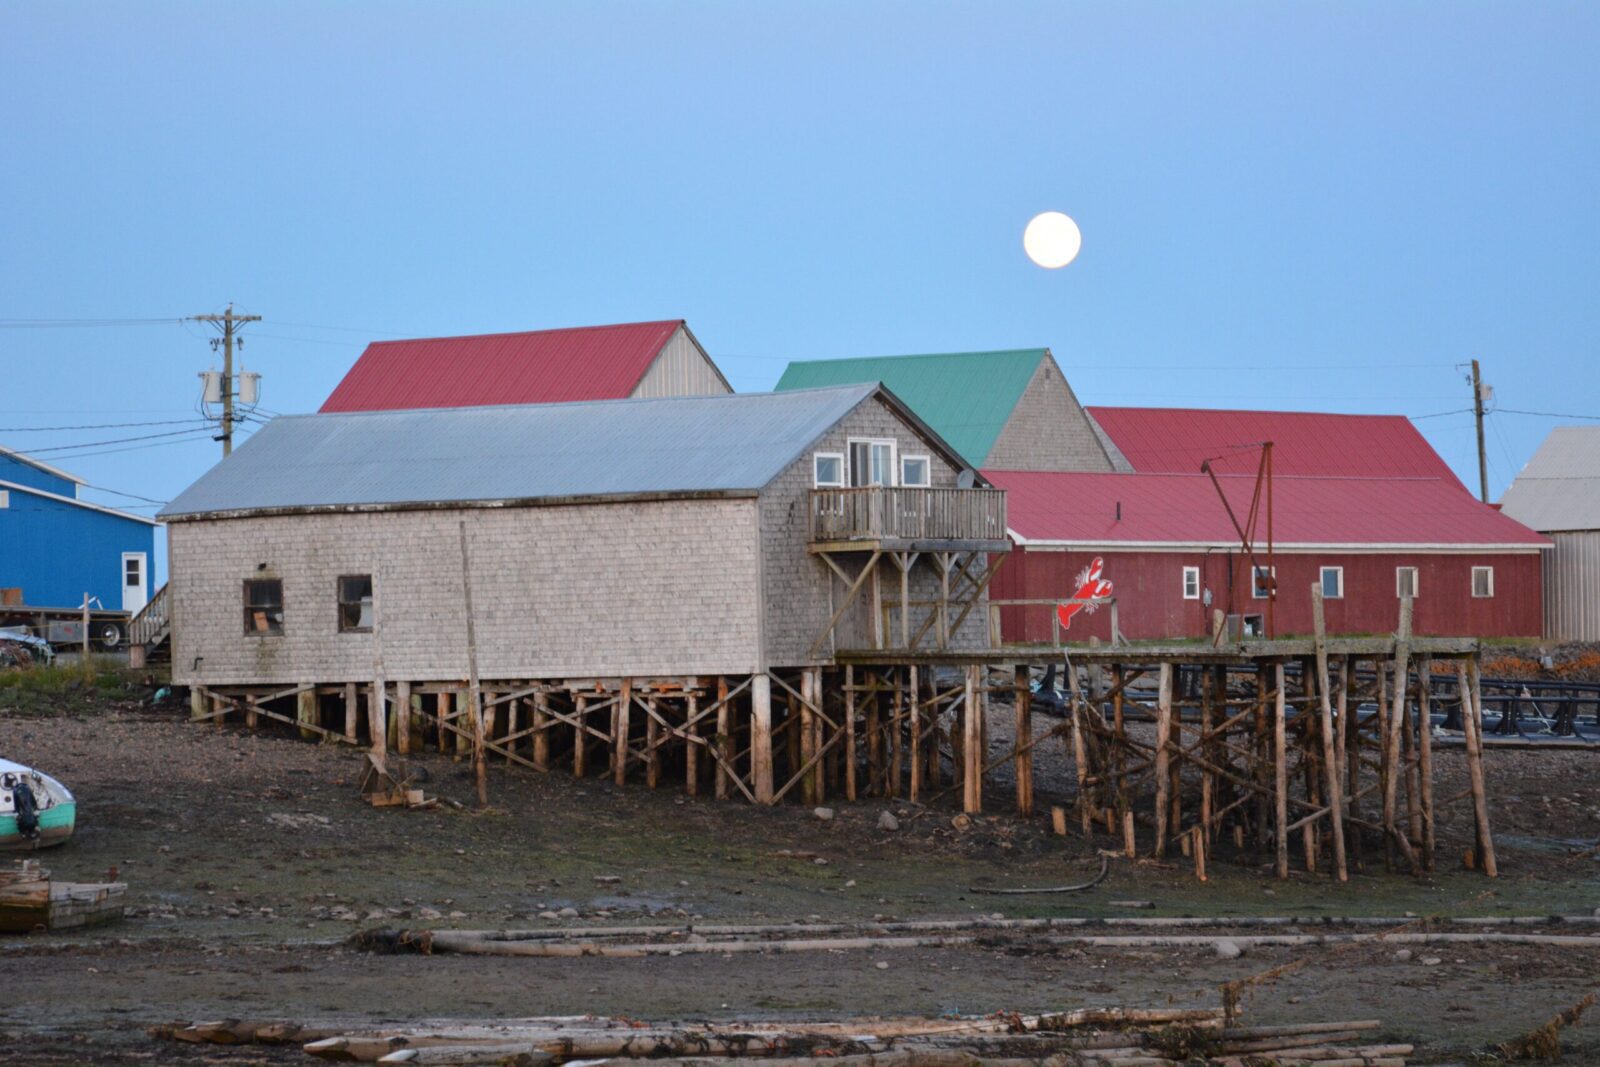 A full moon rises over a group of houses on the shore.